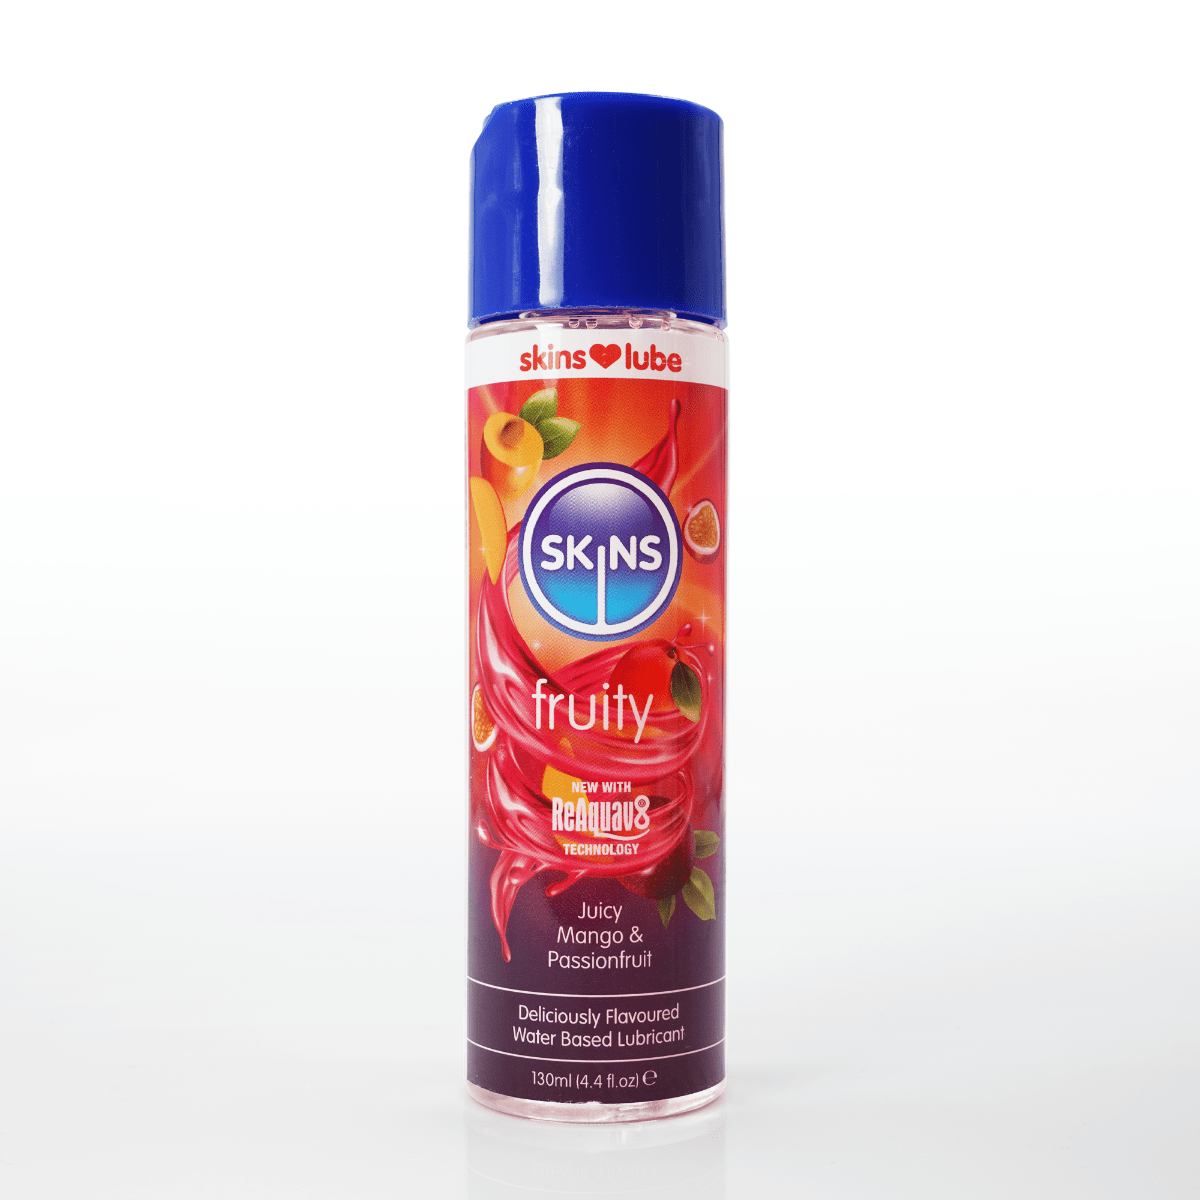 Skins mango and passionfruit lube